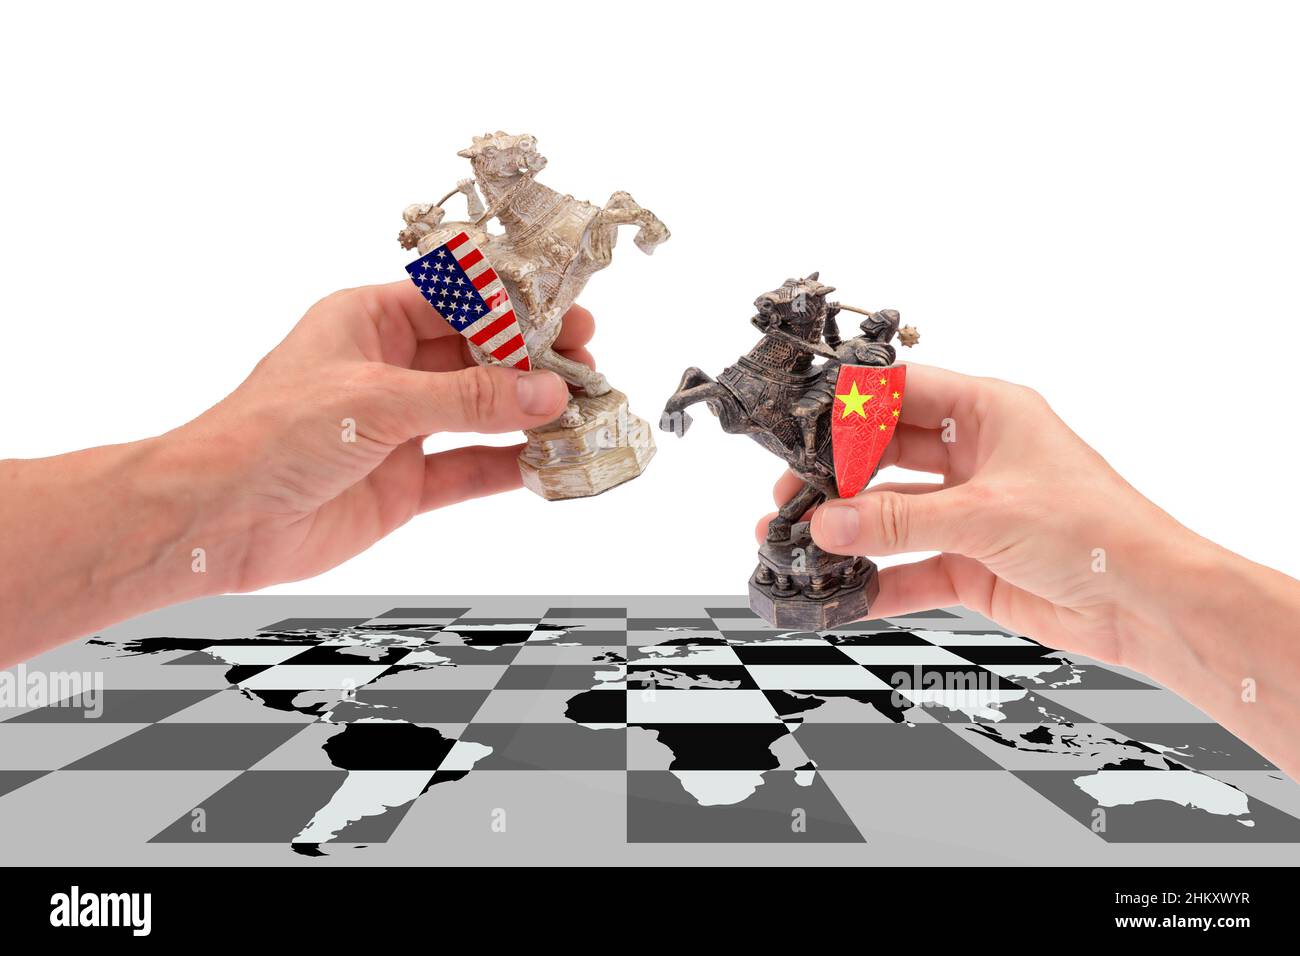 Trade war between USA and China. hands hold two chess pieces of a horse, with american and chinese flags placing them on a chessboard with a world map Stock Photo